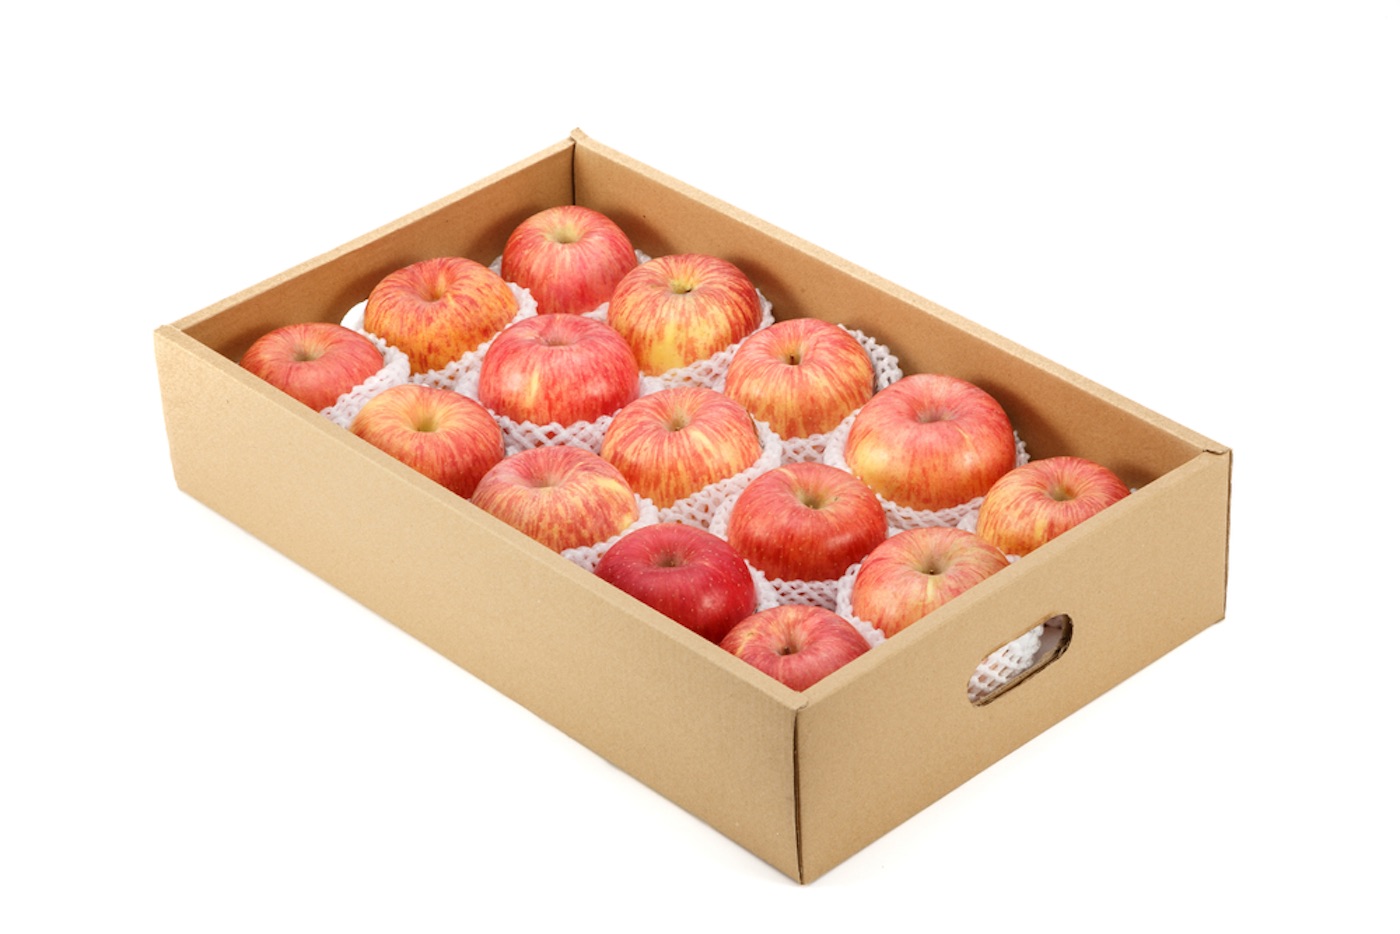 Do Fruits and Vegetables Stay Fresh in Corrugated Boxes? 2